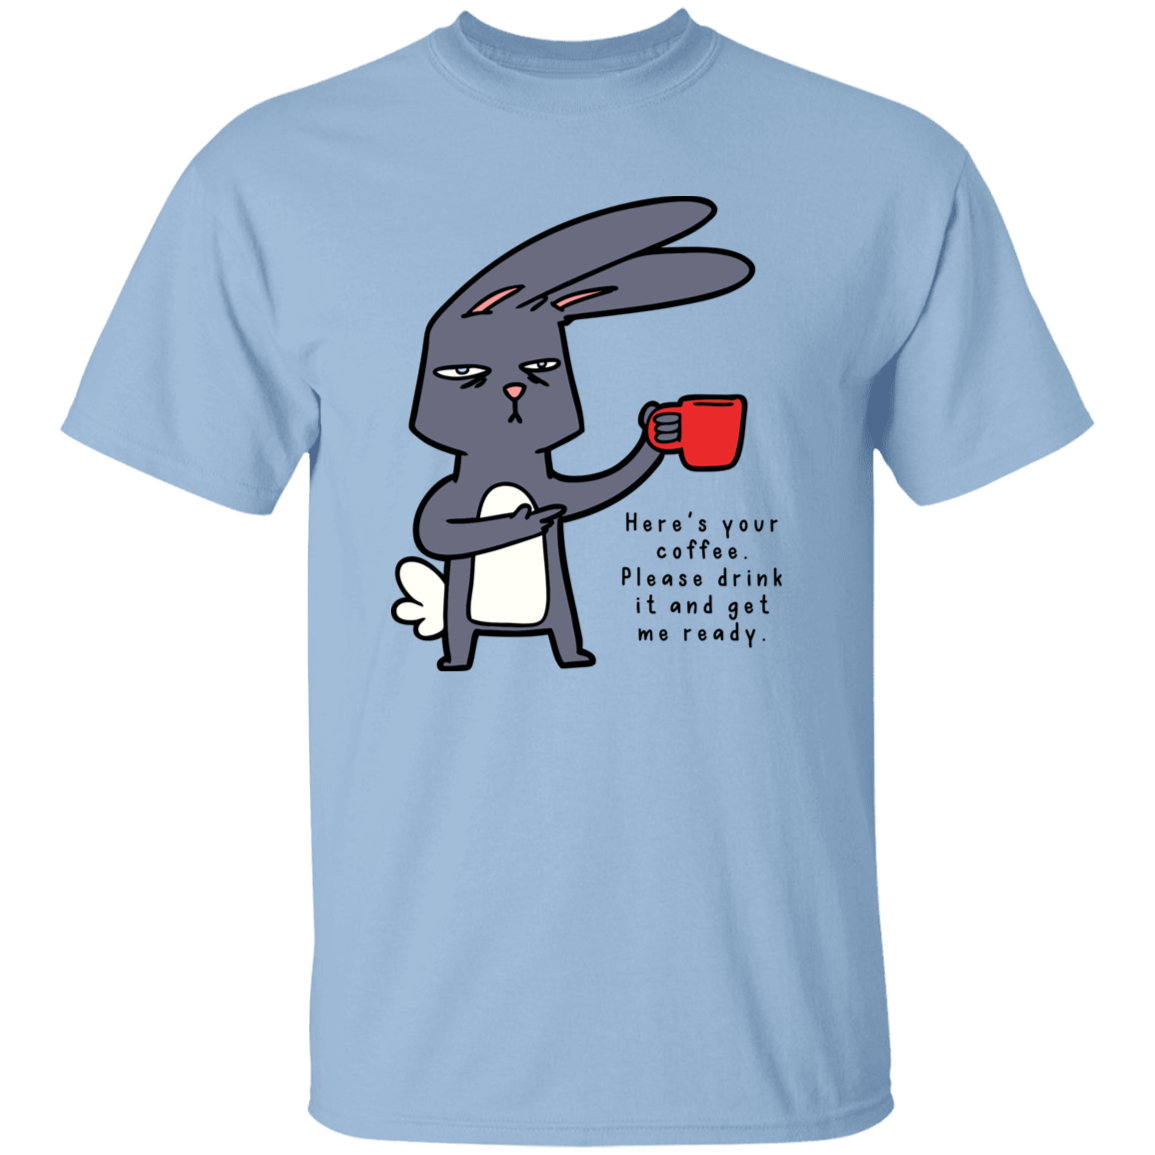 HERE'S YOUR COFFEE T-SHIRT